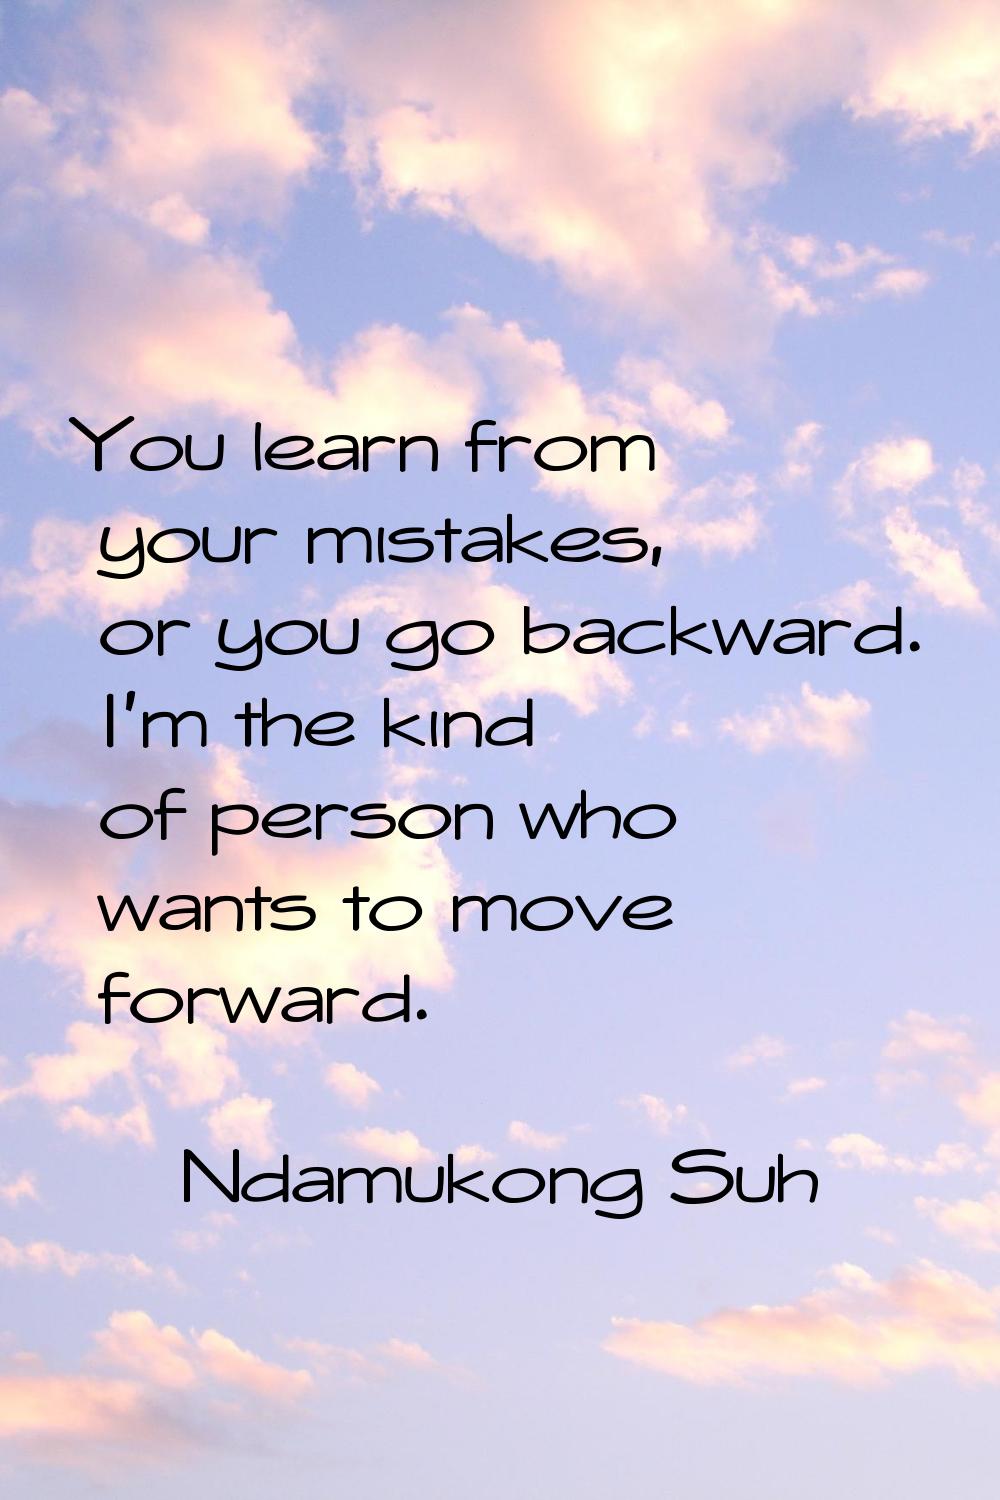 You learn from your mistakes, or you go backward. I'm the kind of person who wants to move forward.